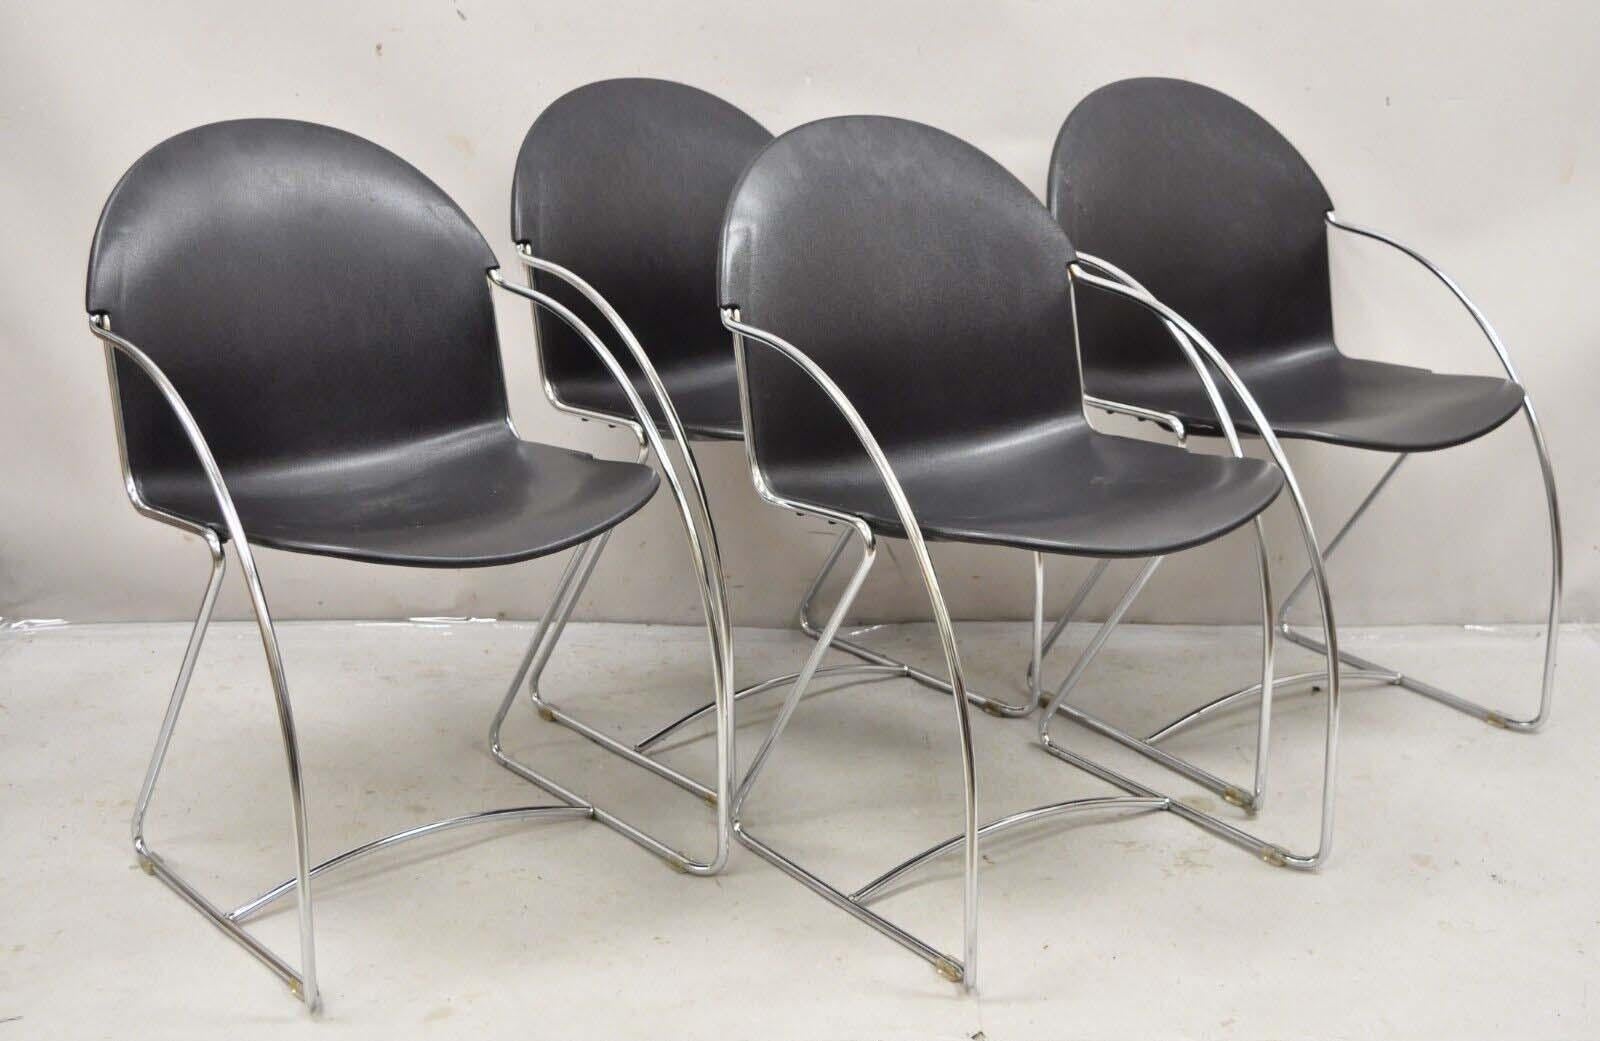 Steelcase Tom Grasman Chrome Frame Black Molded Plastic Stackable Chairs - Set of 4. Circa  1996. Measurements: 32